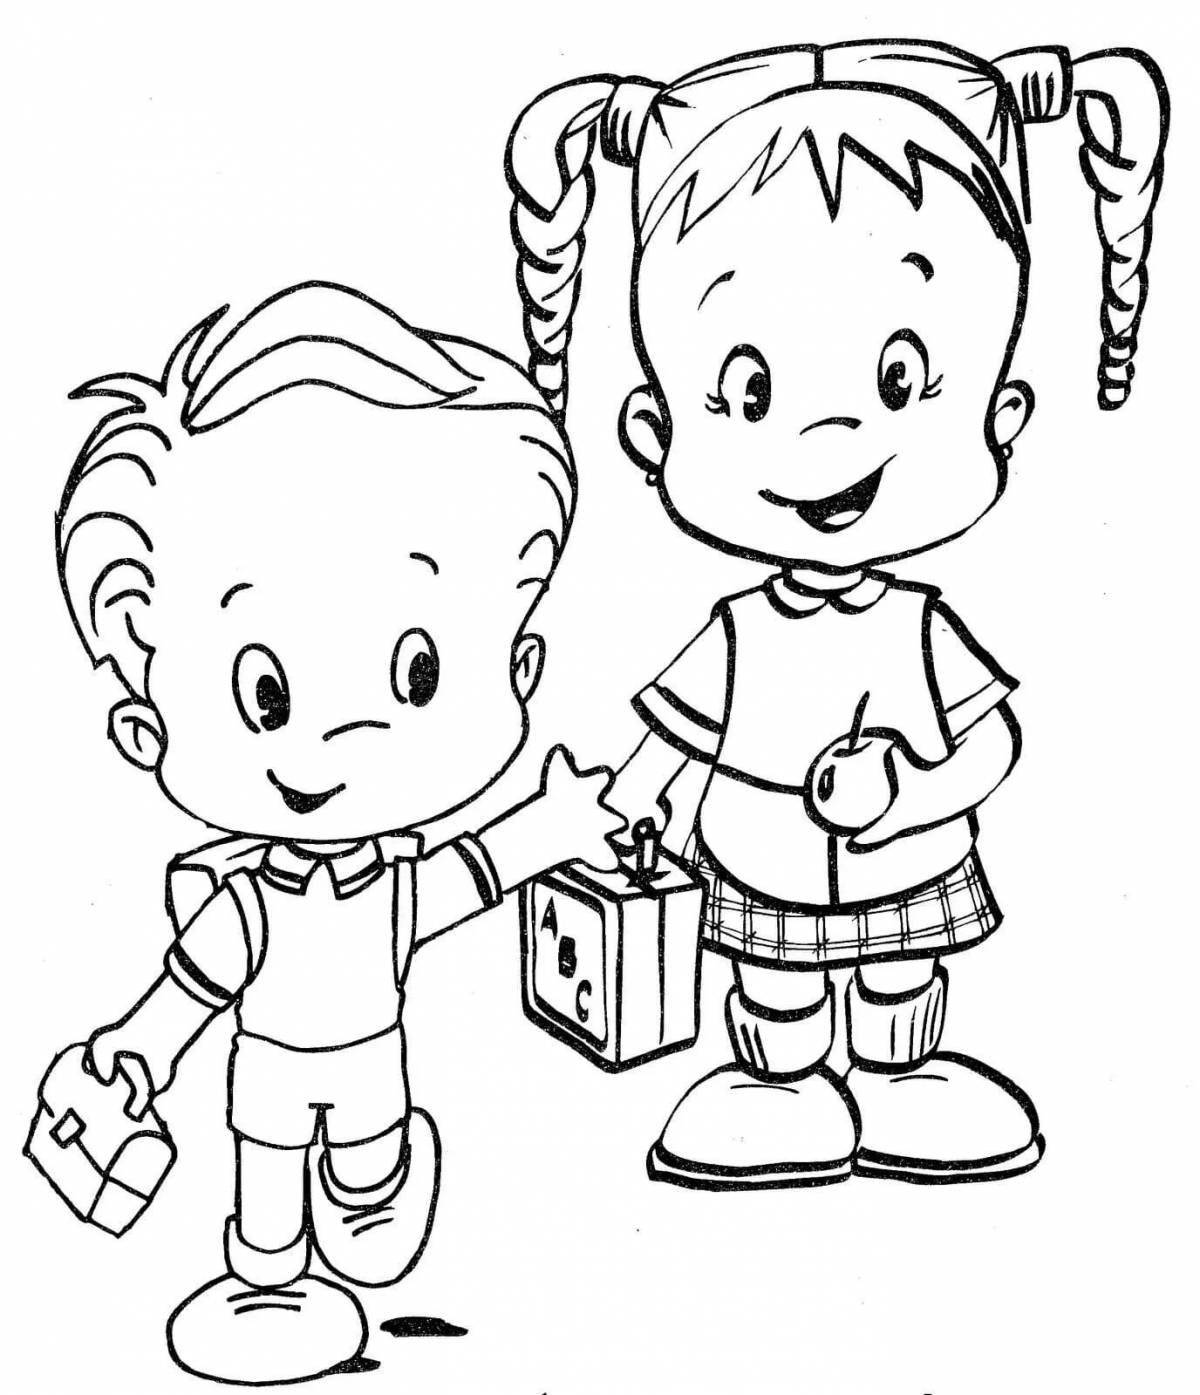 Coloring page jubilant friendship